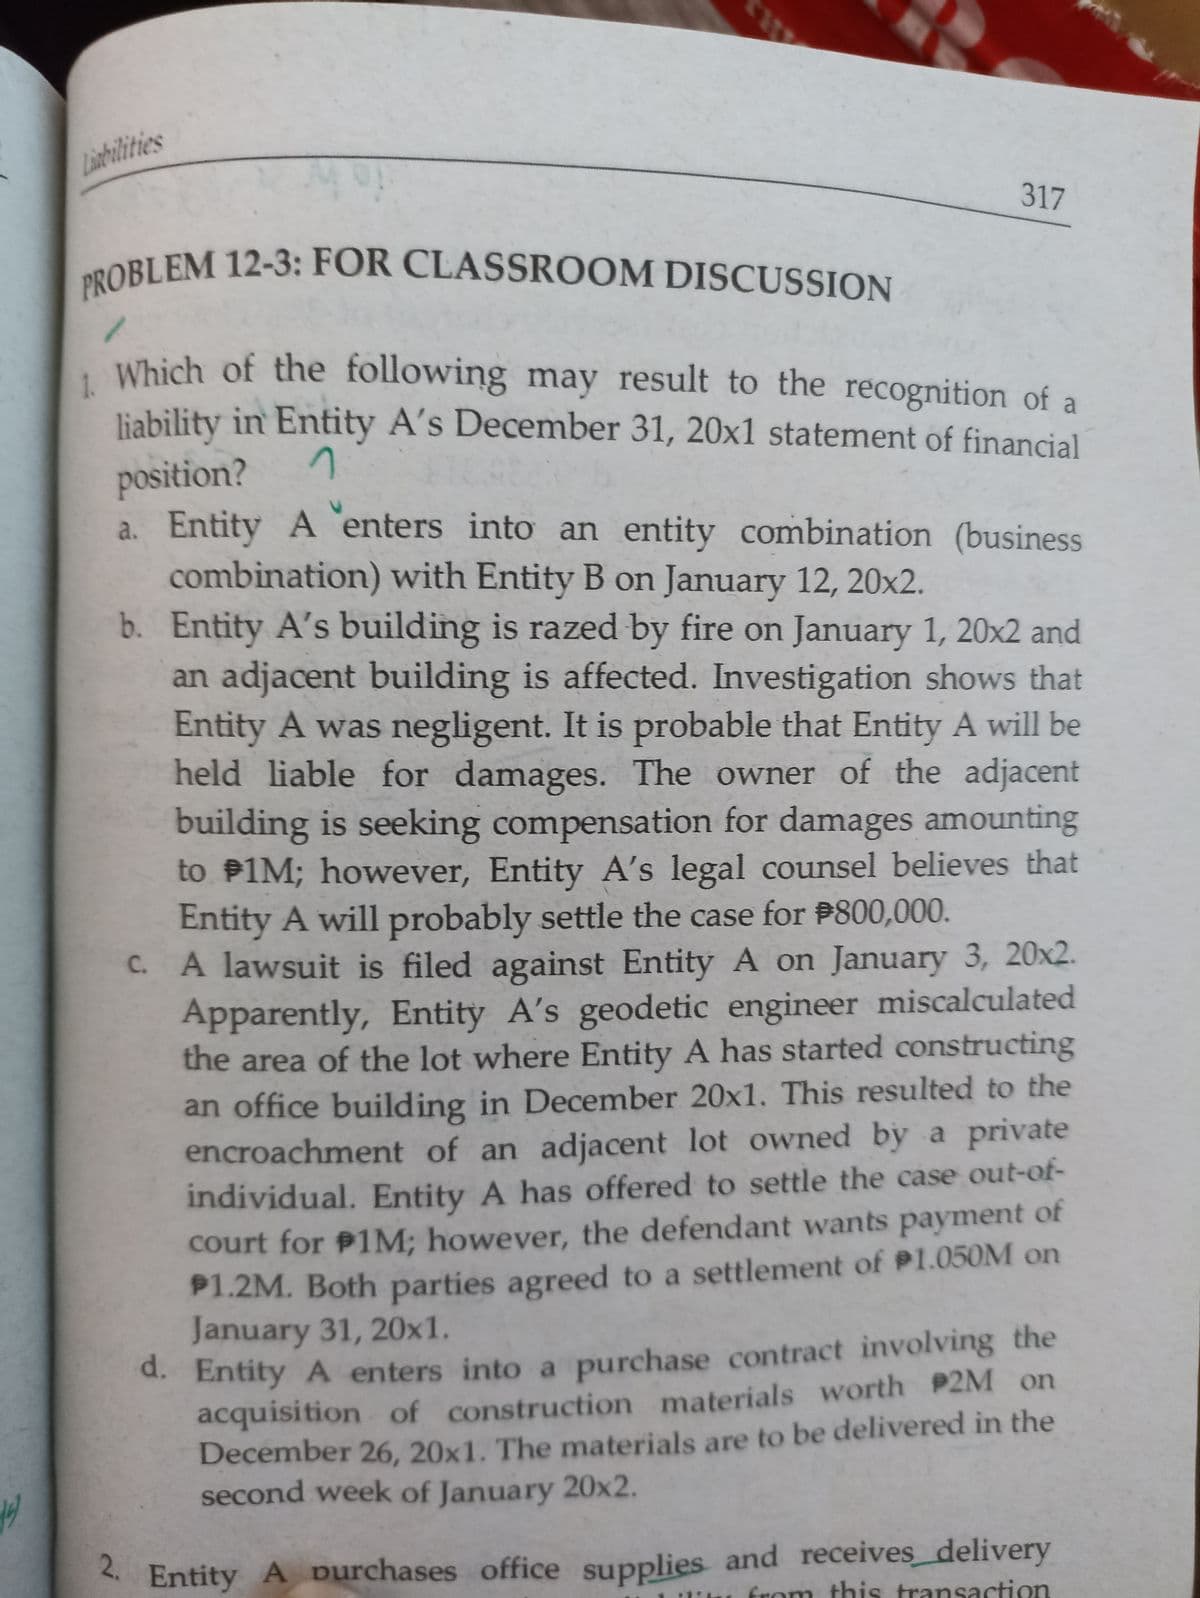 PROBLEM 12-3: FOR CLASSROOM DISCUSSION
Linbilities
317
Which of the following may result to the recognition of a
liability in Entity A's December 31, 20x1 statement of financial
position?
a. Entity A enters into an entity combination (business
combination) with Entity B on January 12, 20x2.
b. Entity A's building is razed by fire on January 1, 20x2 and
an adjacent building is affected. Investigation shows that
Entity A was negligent. It is probable that Entity A will be
held liable for damages. The owner of the adjacent
building is seeking compensation for damages amounting
to P1M; however, Entity A's legal counsel believes that
Entity A will probably settle the case for P800,000.
C. A lawsuit is filed against Entity A on January 3, 20x2.
Apparently, Entity A's geodetic engineer miscalculated
the area of the lot where Entity A has started constructing
an office building in December 20x1. This resulted to the
encroachment of an adjacent lot owned by a private
individual. Entity A has offered to settle the case out-of-
court for P1M; however, the defendant wants payment
of
P1.2M. Both parties agreed to a settlement of P1.050M on
January 31, 20x1.
d. Entity A enters into a purchase contract involving the
acquisition of construction materials worth P2M on
December 26, 20x1. The materials are to be delivered in the
second week of January 20x2.
Entity A purchases office supplies and receives_delivery
from this transaction
2.
